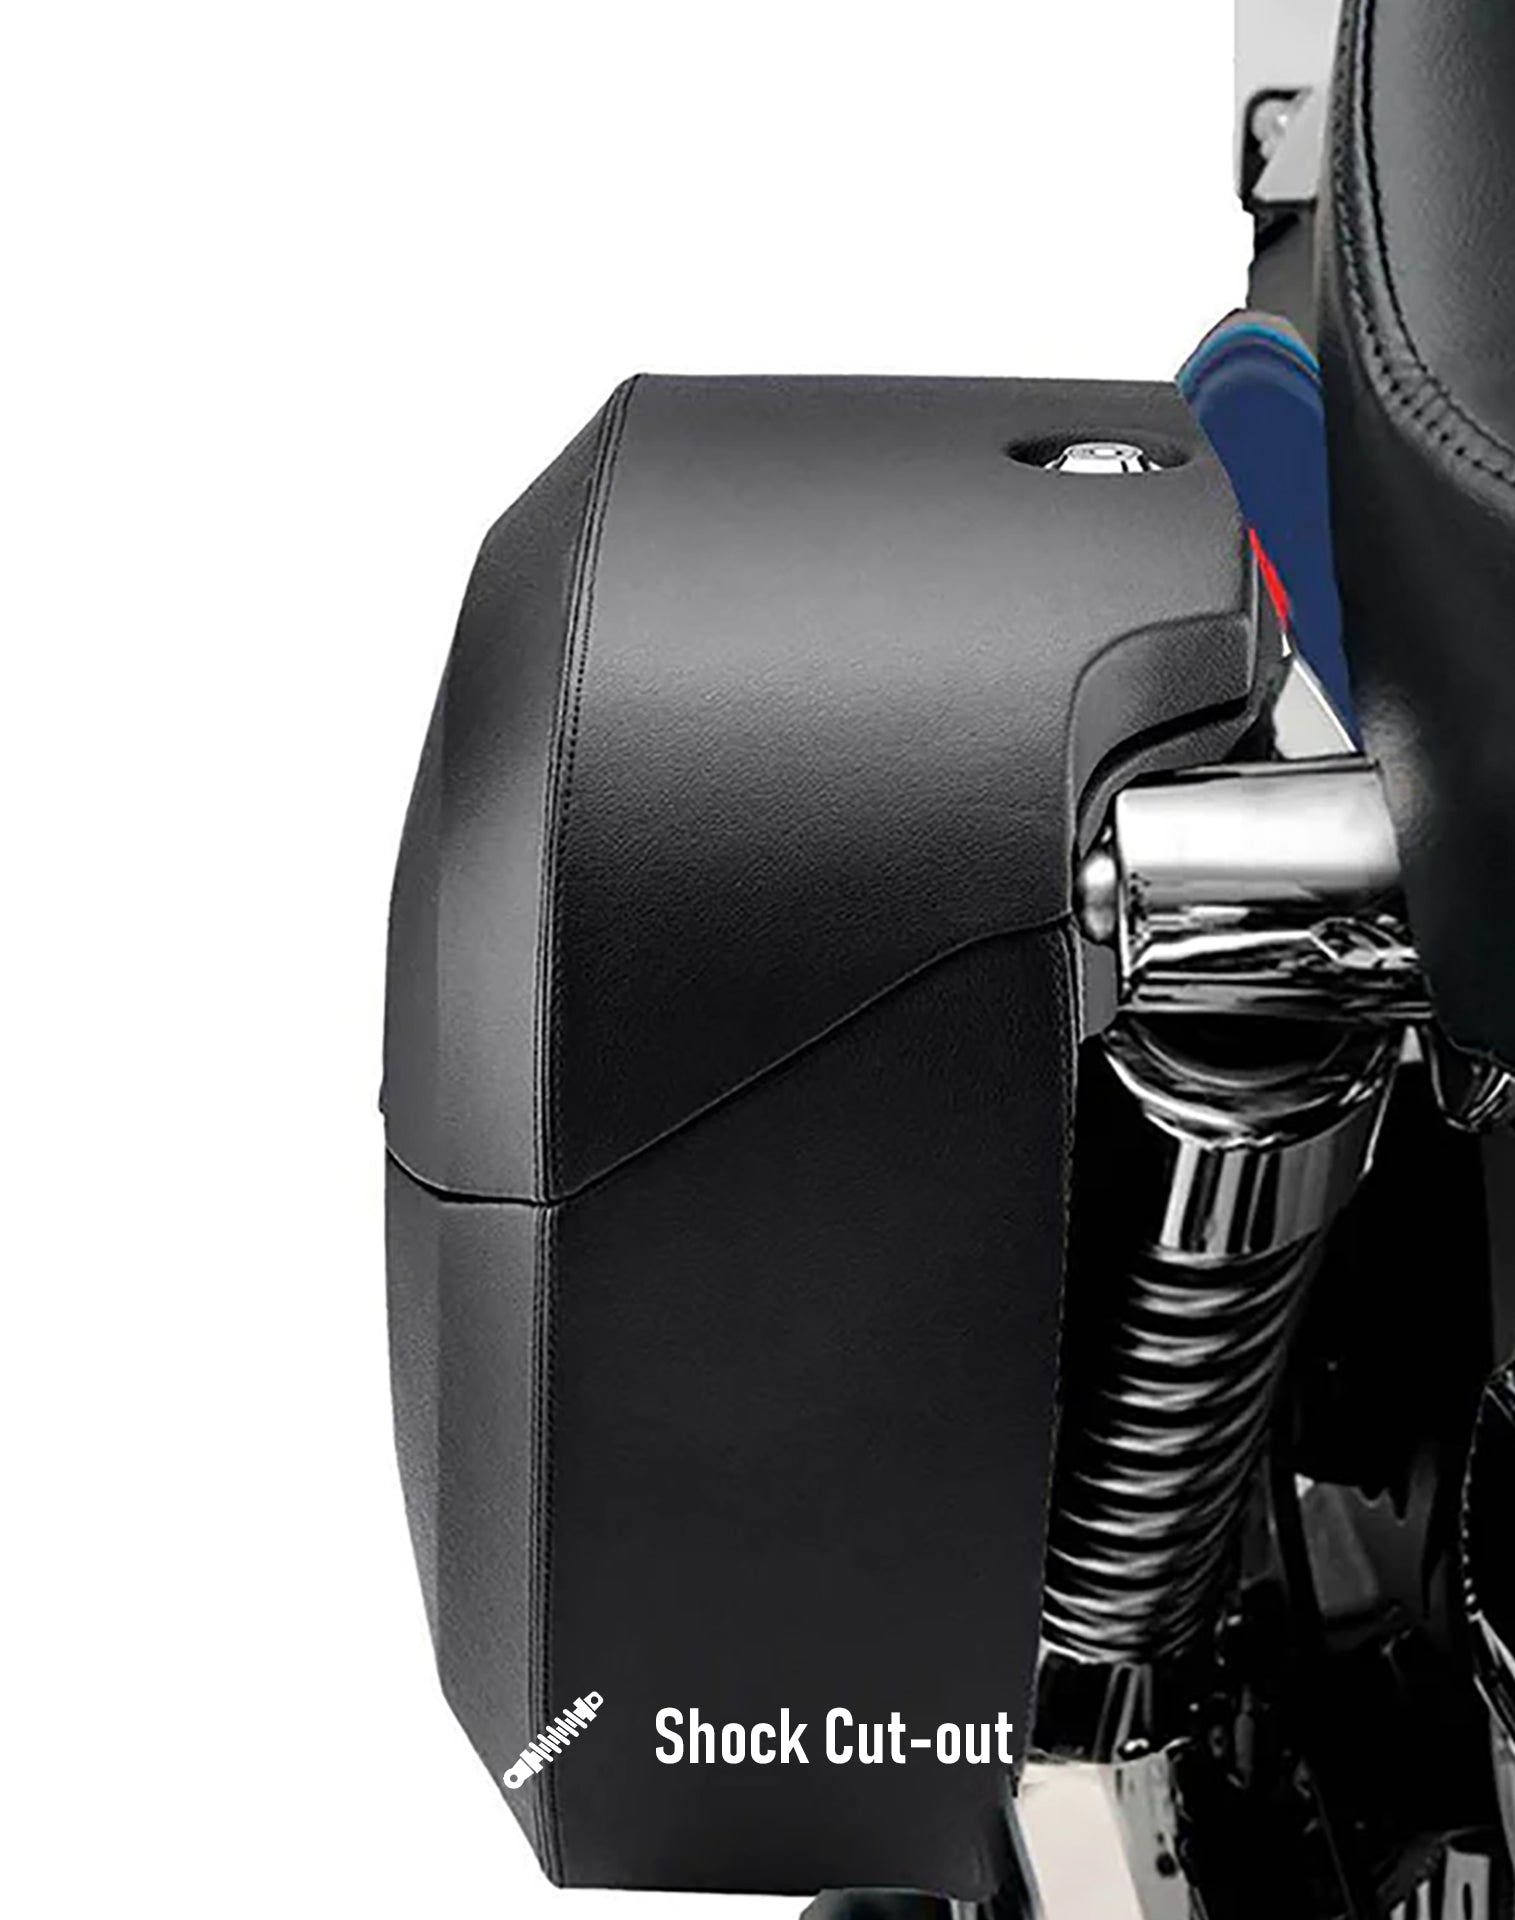 Viking Lamellar Raven Extra Large Shock Cut Out Leather Covered Hard Saddlebags For Harley Sportster 1200 Nightster Xl1200N Hard Shell Construction